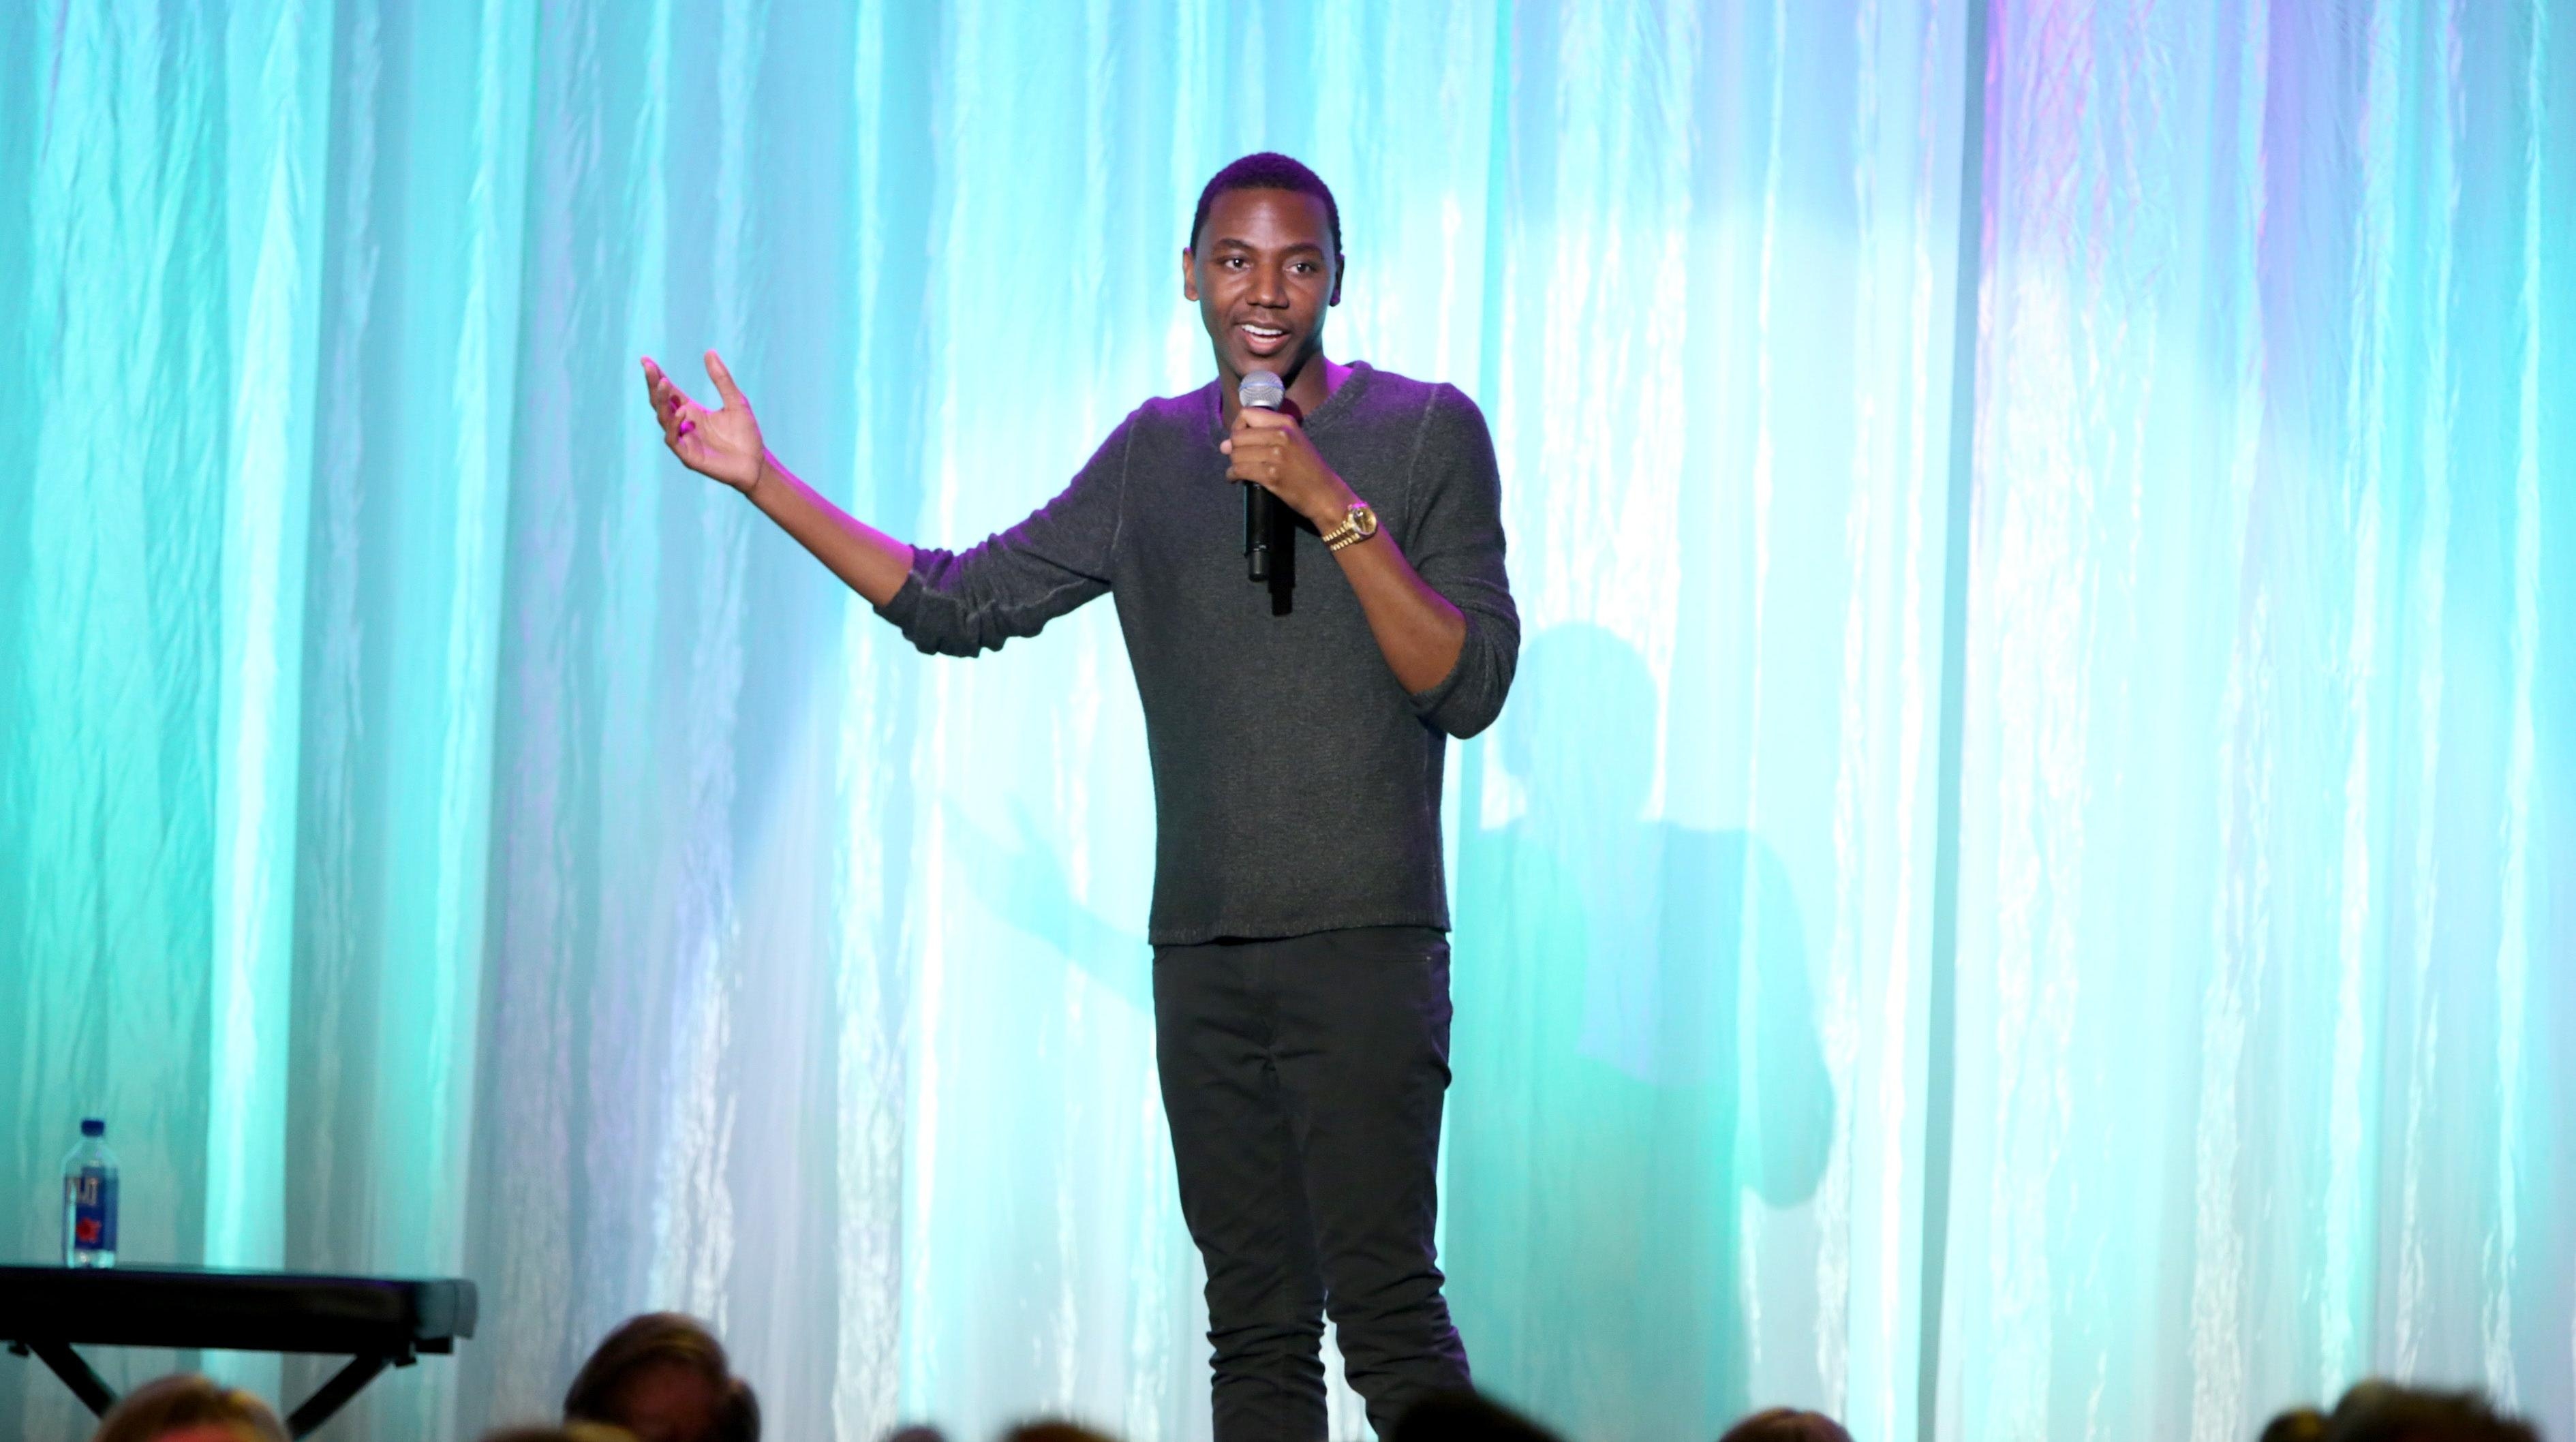 Jerrod Carmichael on Dave Chappelle: “Do you know what comes up when you Google your name, bro?”